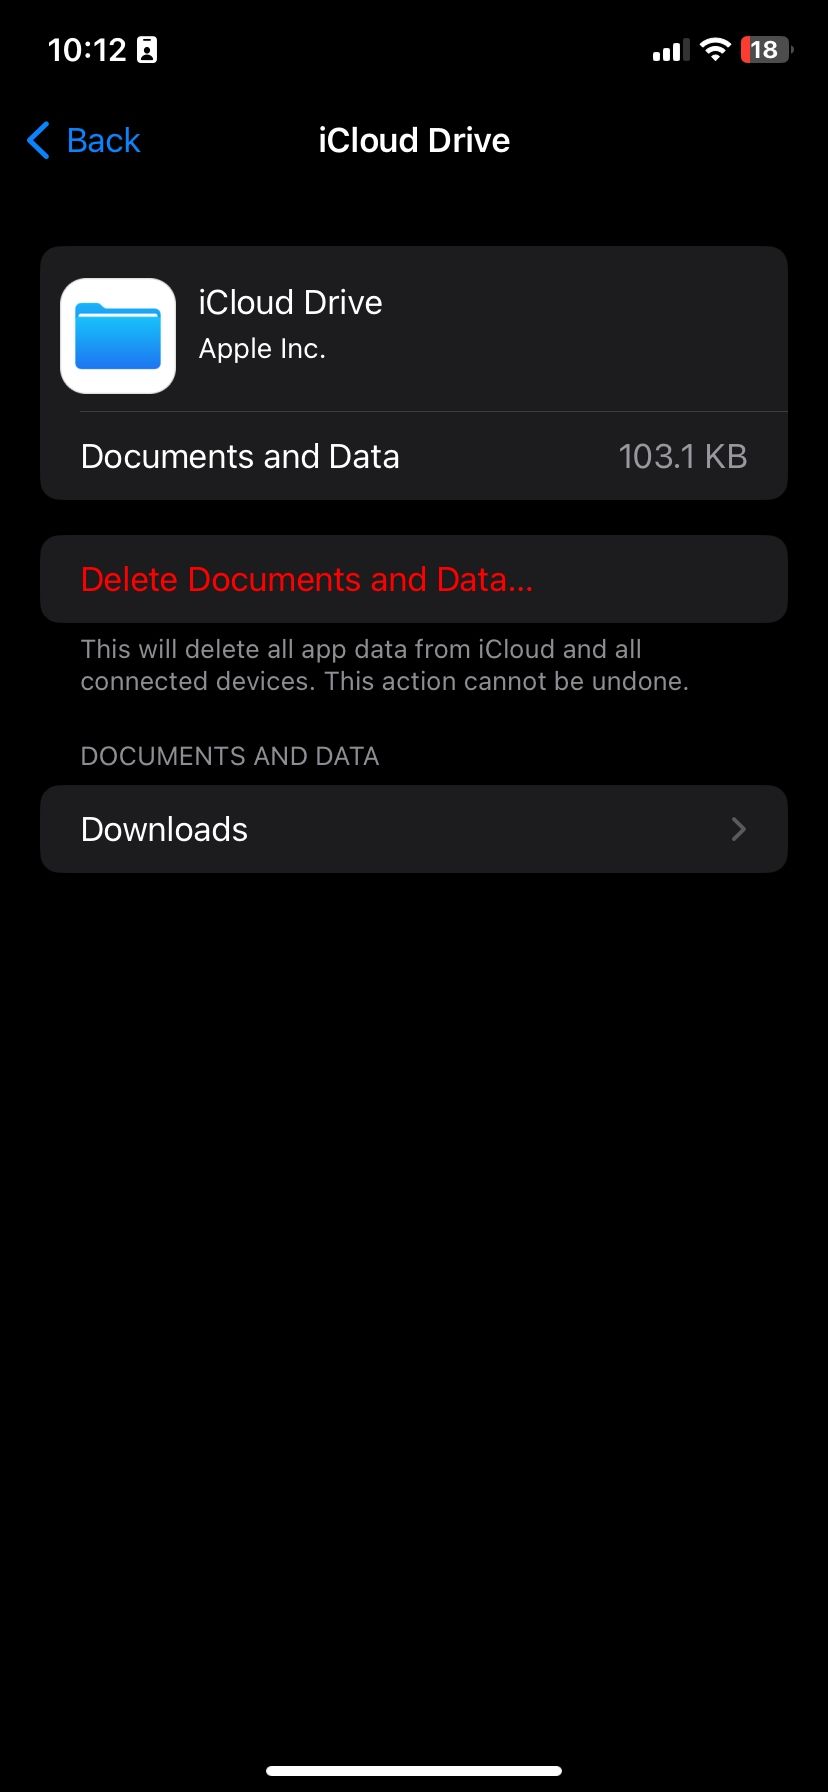 Viewing the size occupied by iCloud Drive on iOS